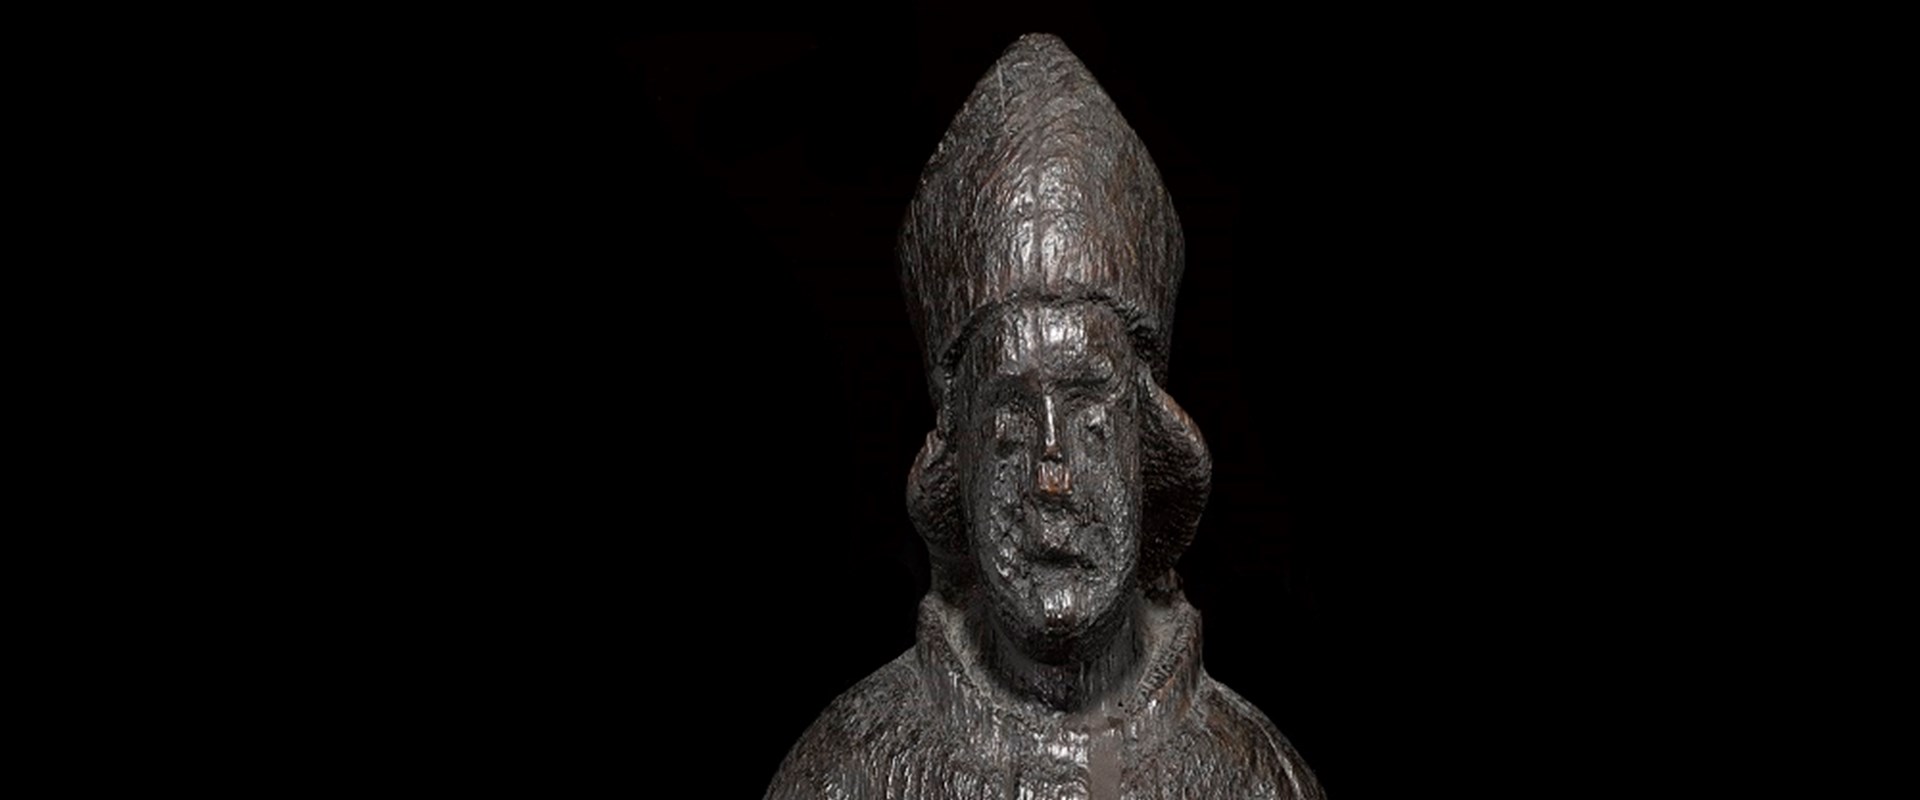 Wooden figure of a saint in flowing robes. The figure is heavily worn and darkened, its arms missing and its face eroded to seem melancholic.